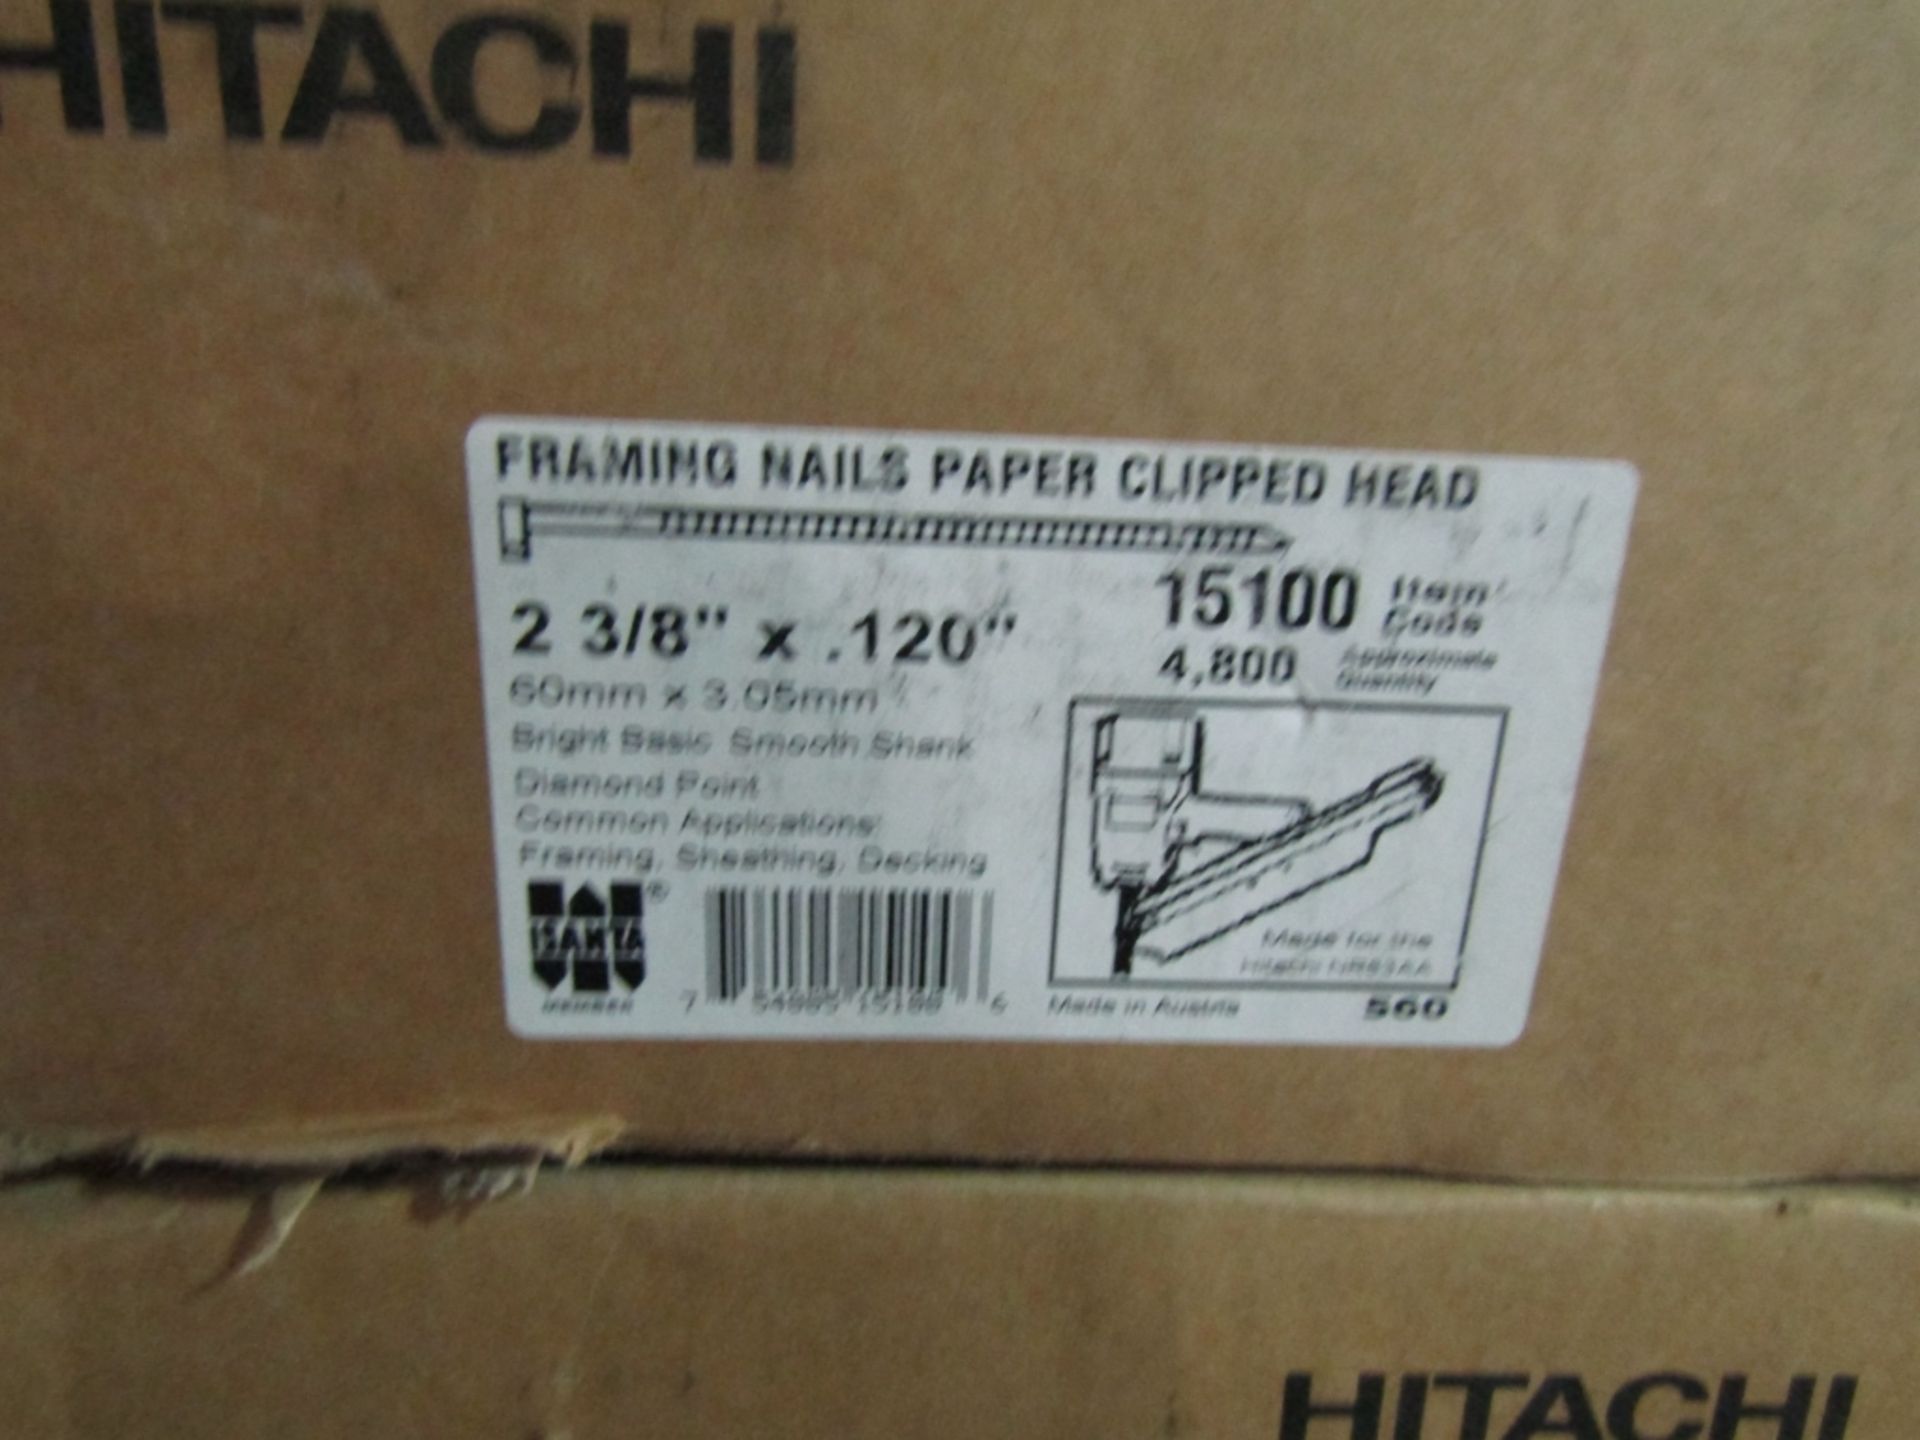 (7) New Boxes Hitachi Framing Nails, Paper Clipped Head2 3/8" x .120" Approximate 4800 Quantity - Image 2 of 3